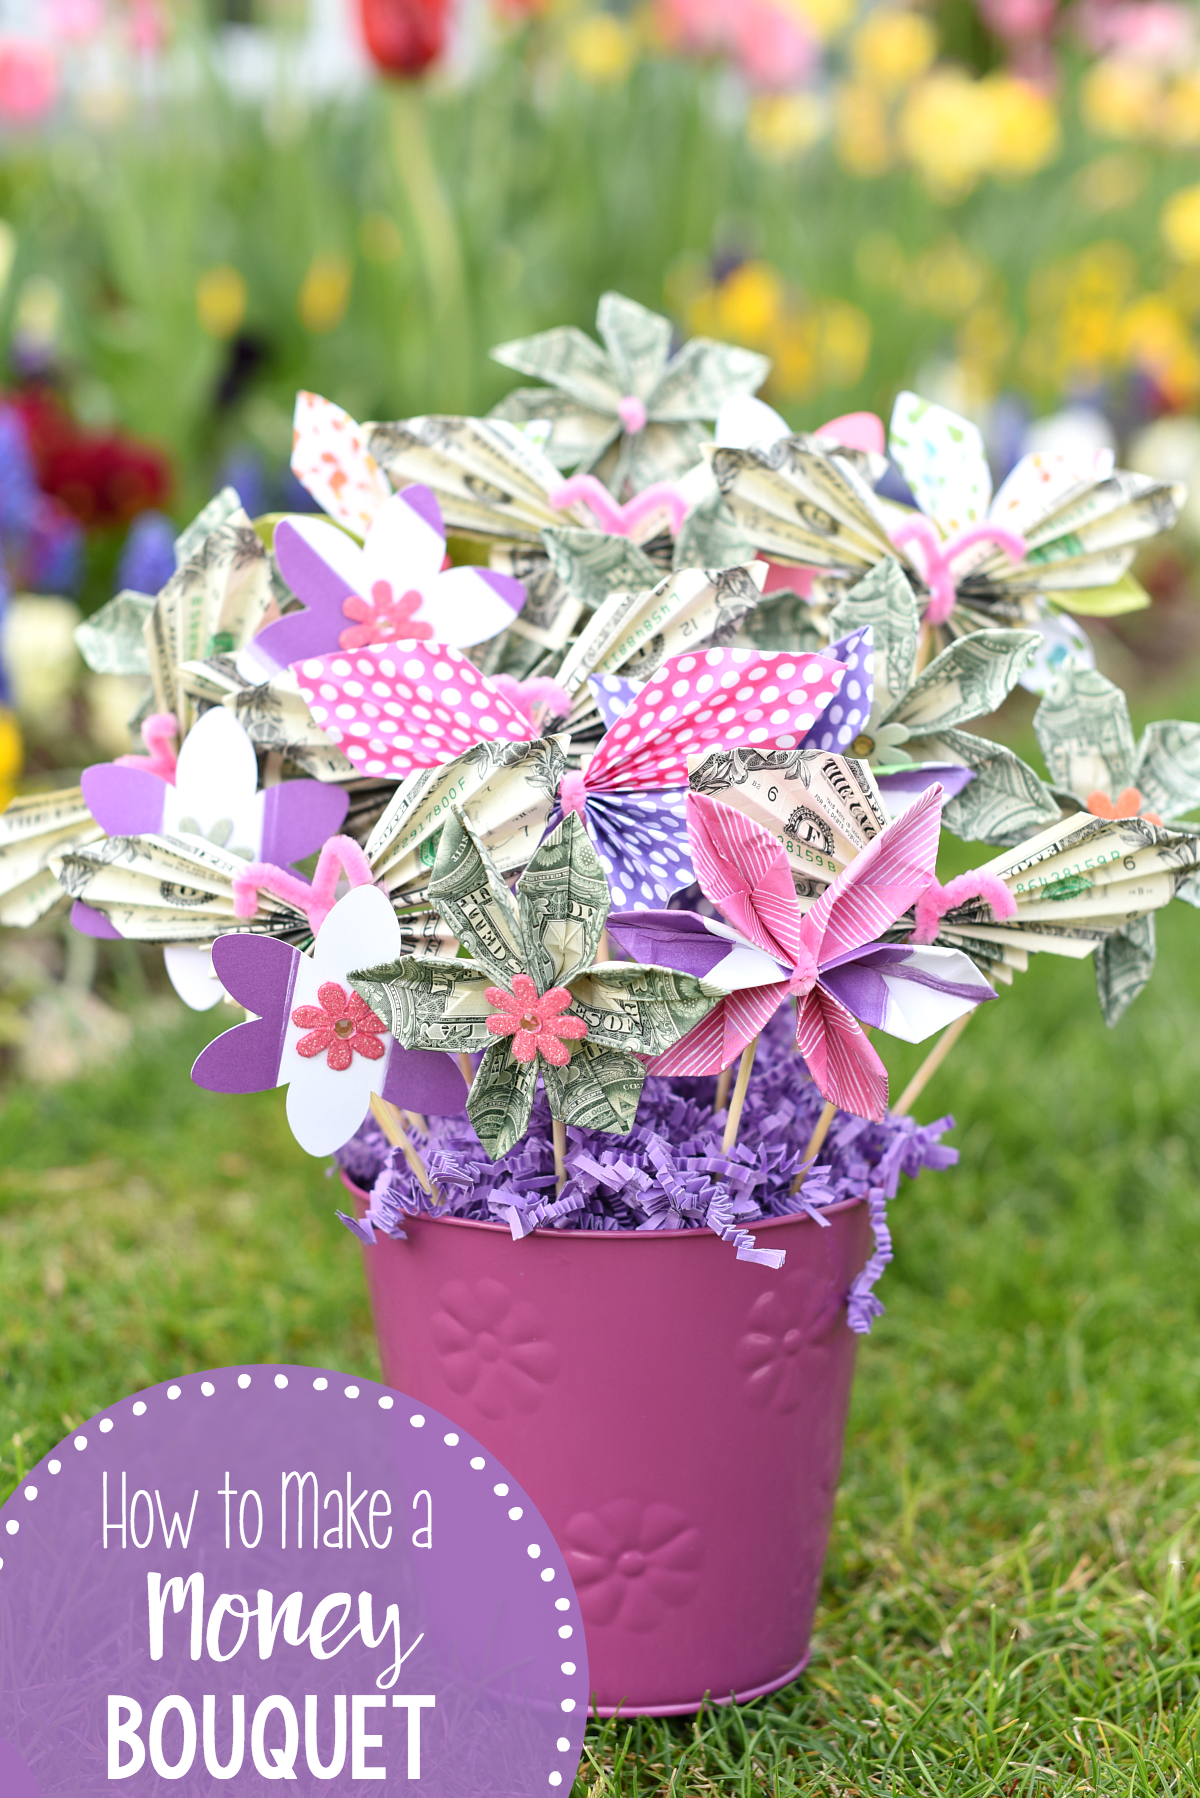 How to Make a Money Bouquet-One of the best ways to give money for any occasion! Great for graduation, birthdays, weddings or holidays! Easy to fold and make this money tree. #graduationgift #birthdaygifts #moneybouquet #bridalshower #moneygifts